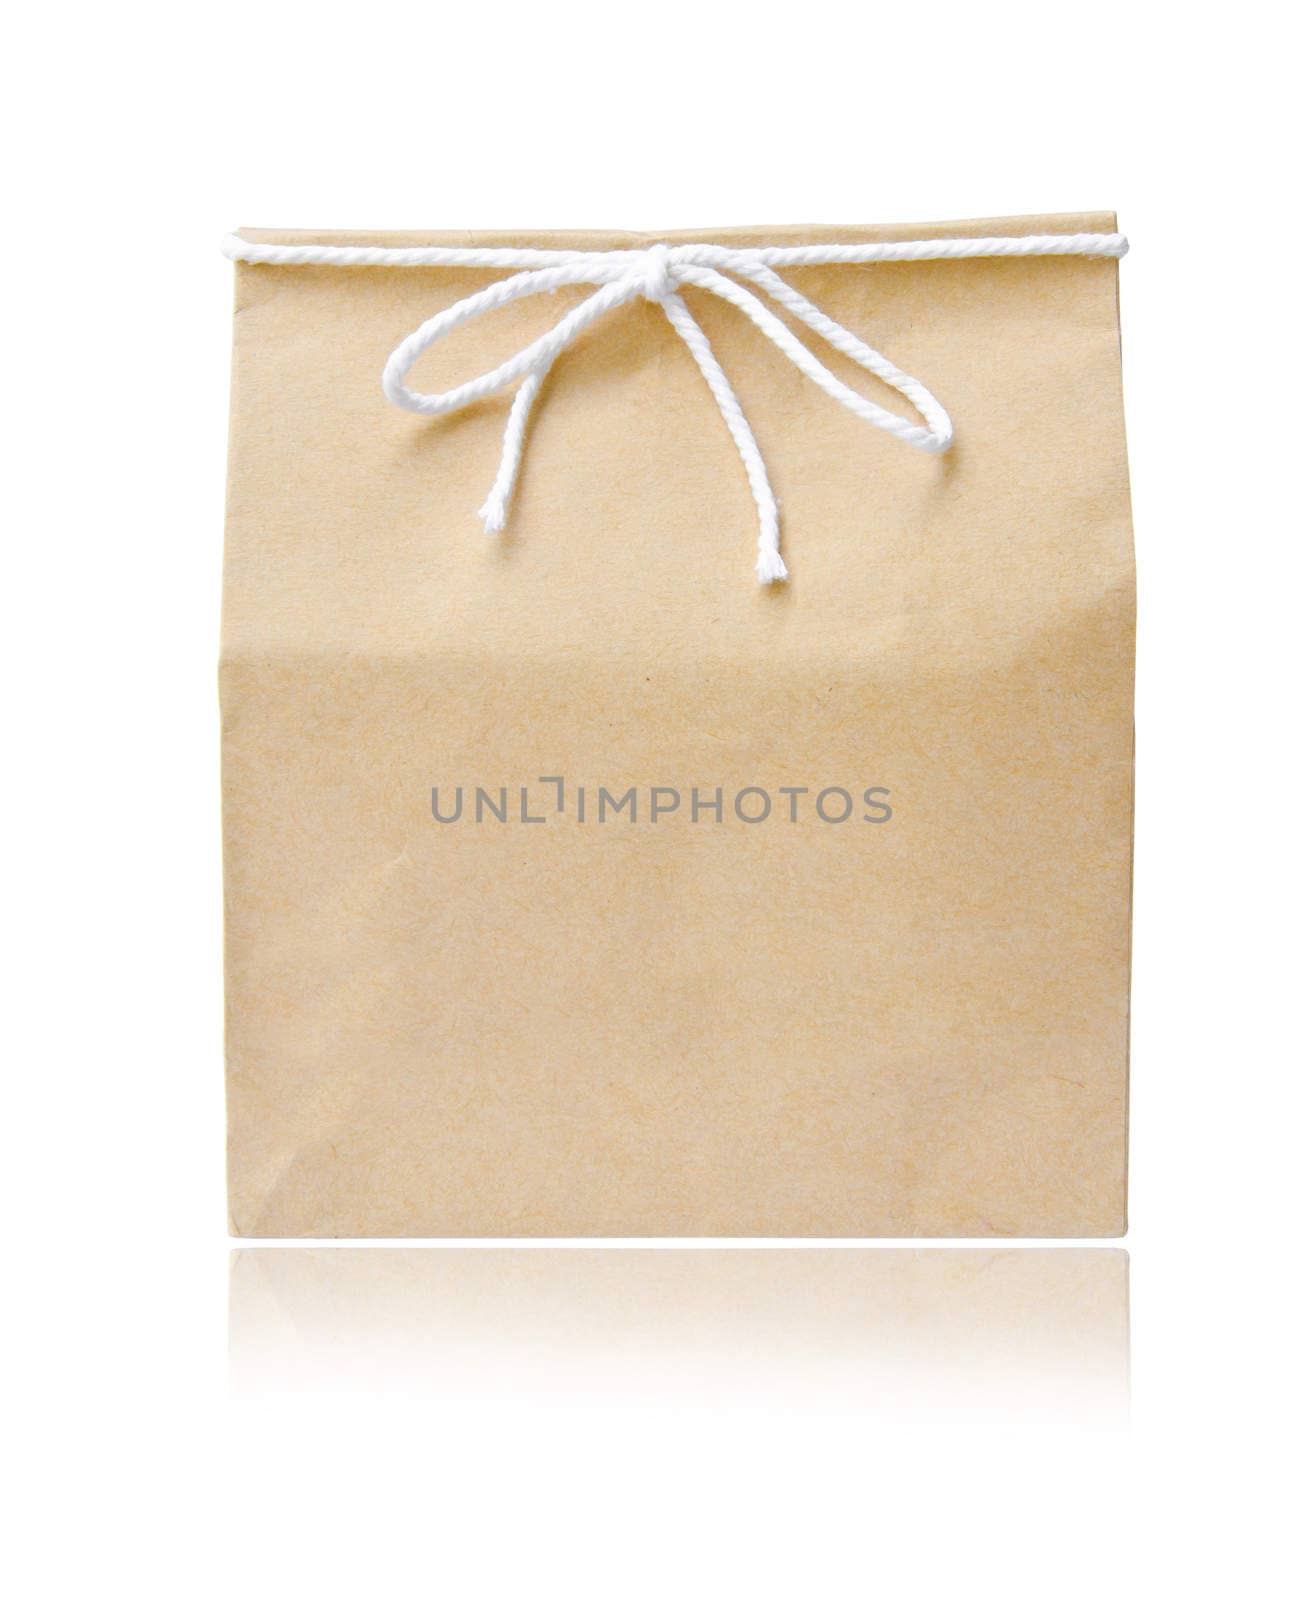 recycle brown paper bag on white background